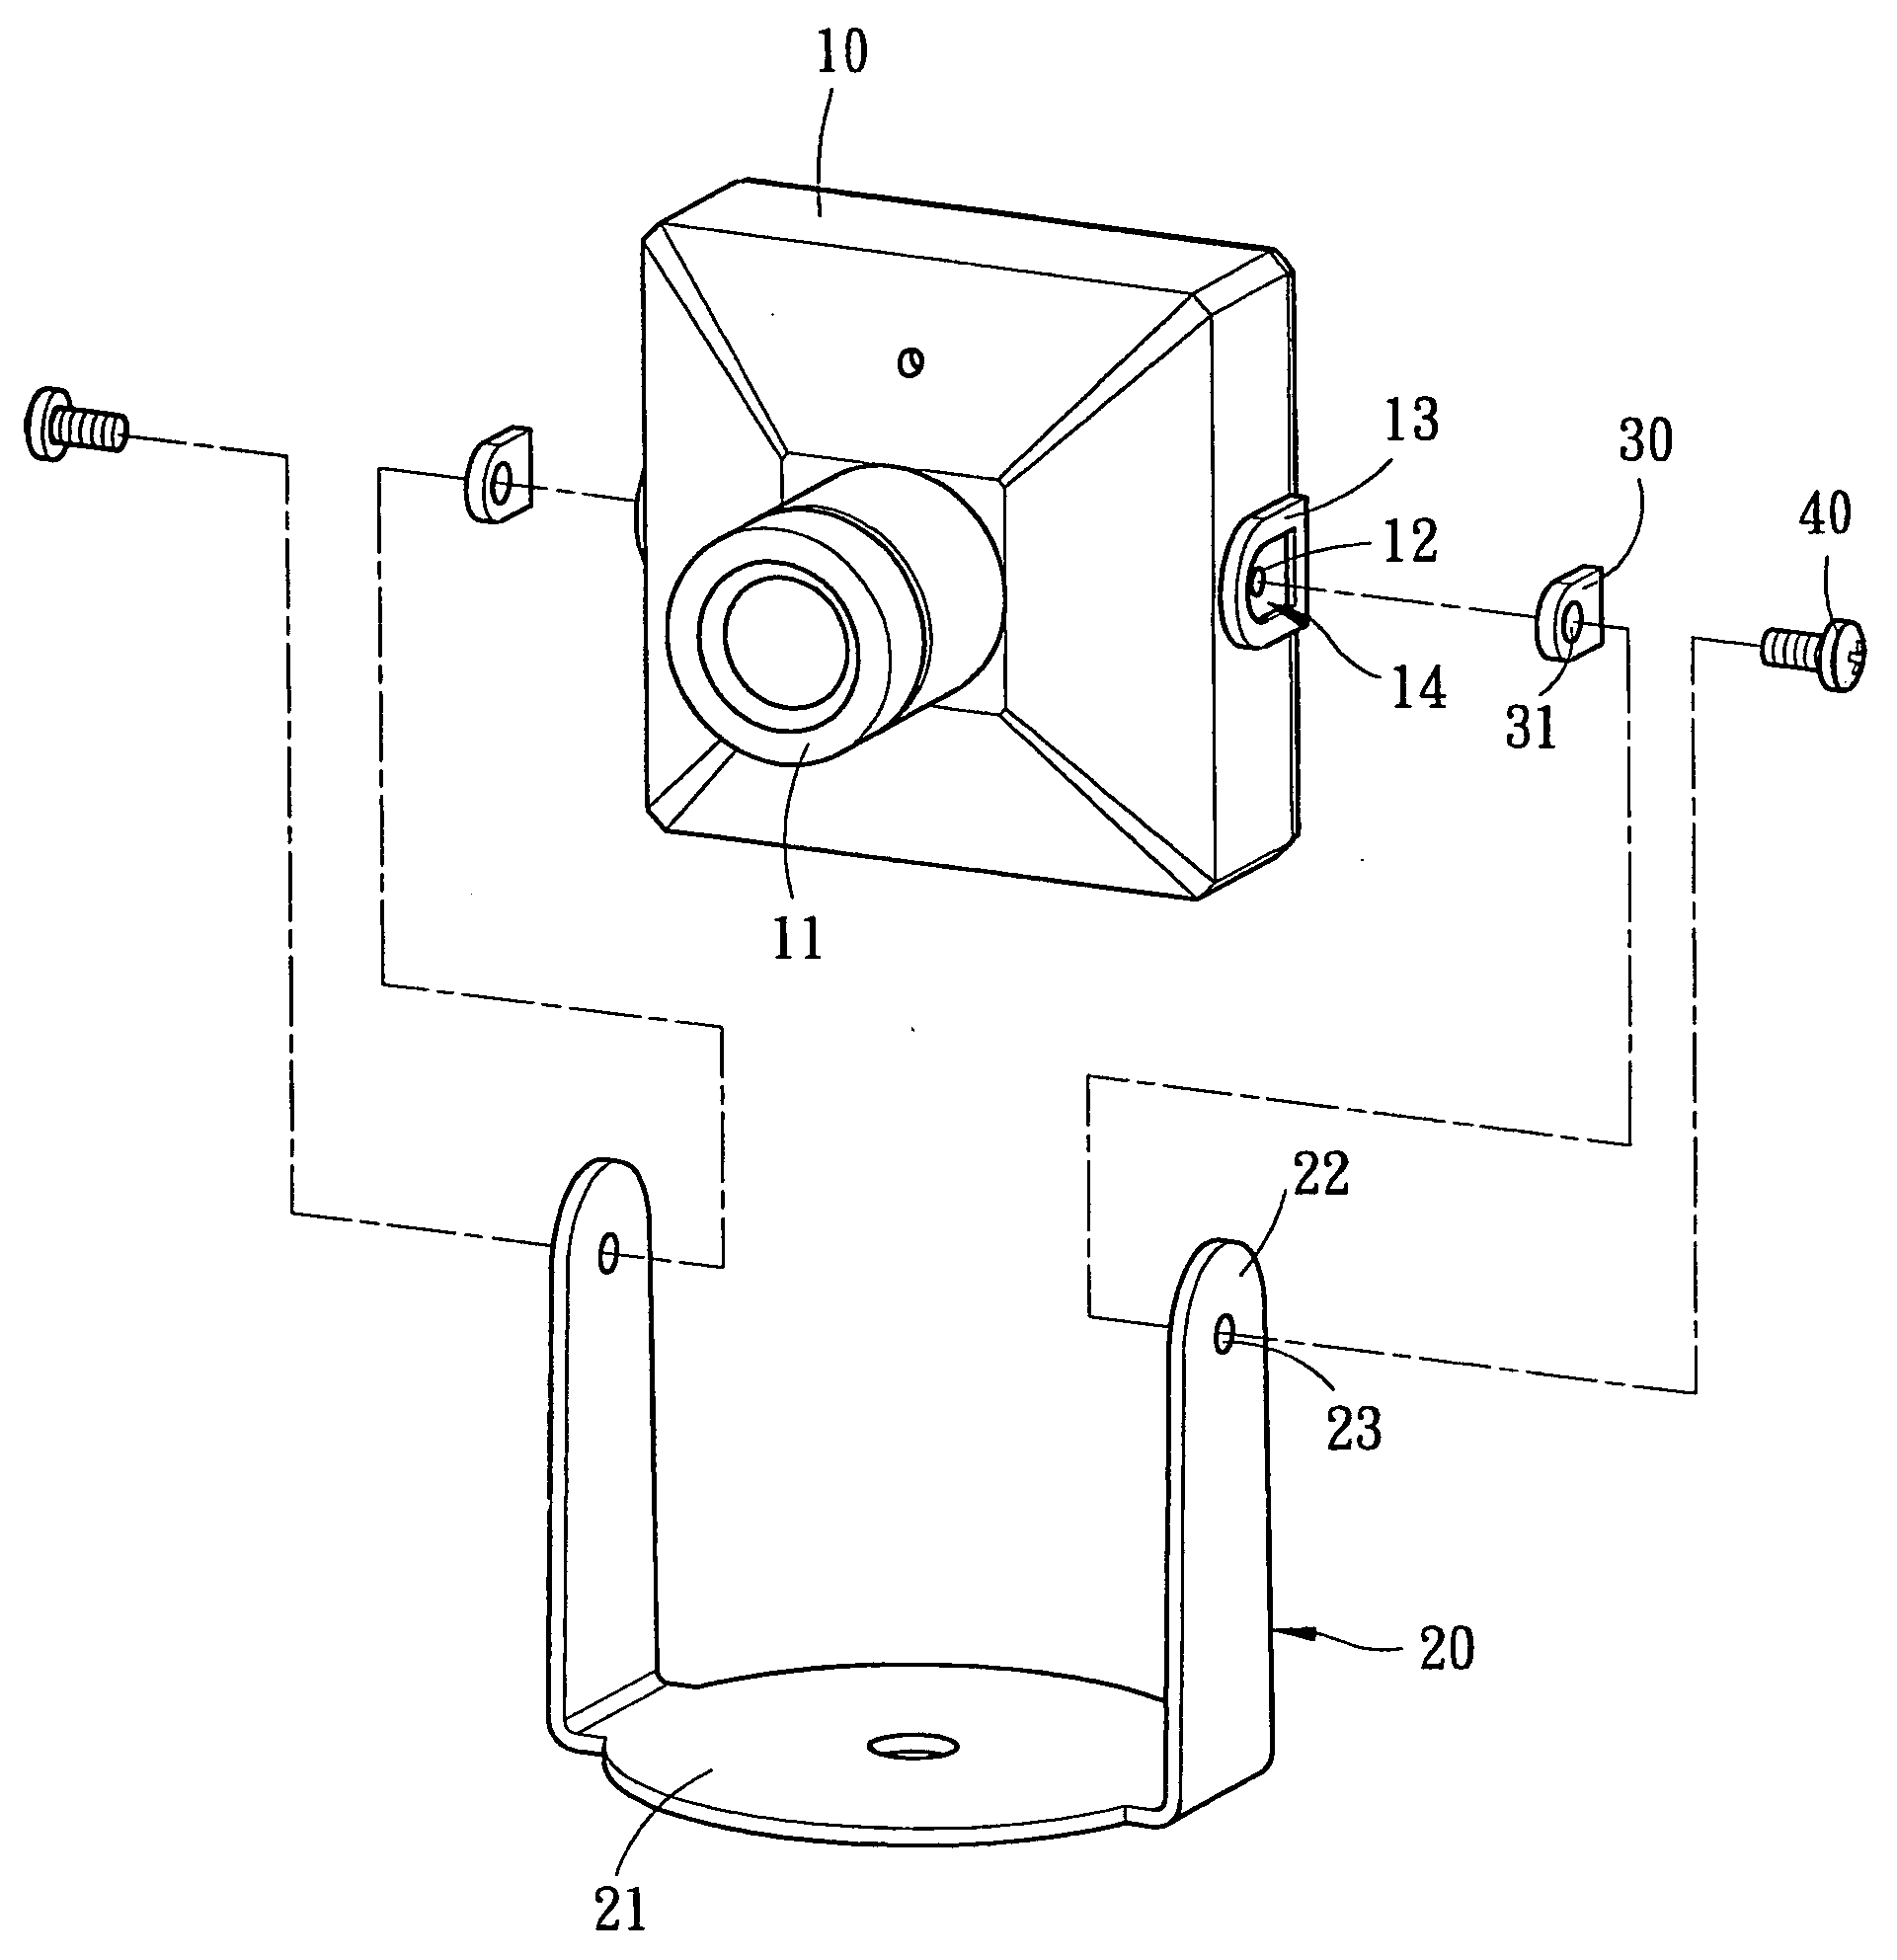 Mini-camera with an adjustable structure